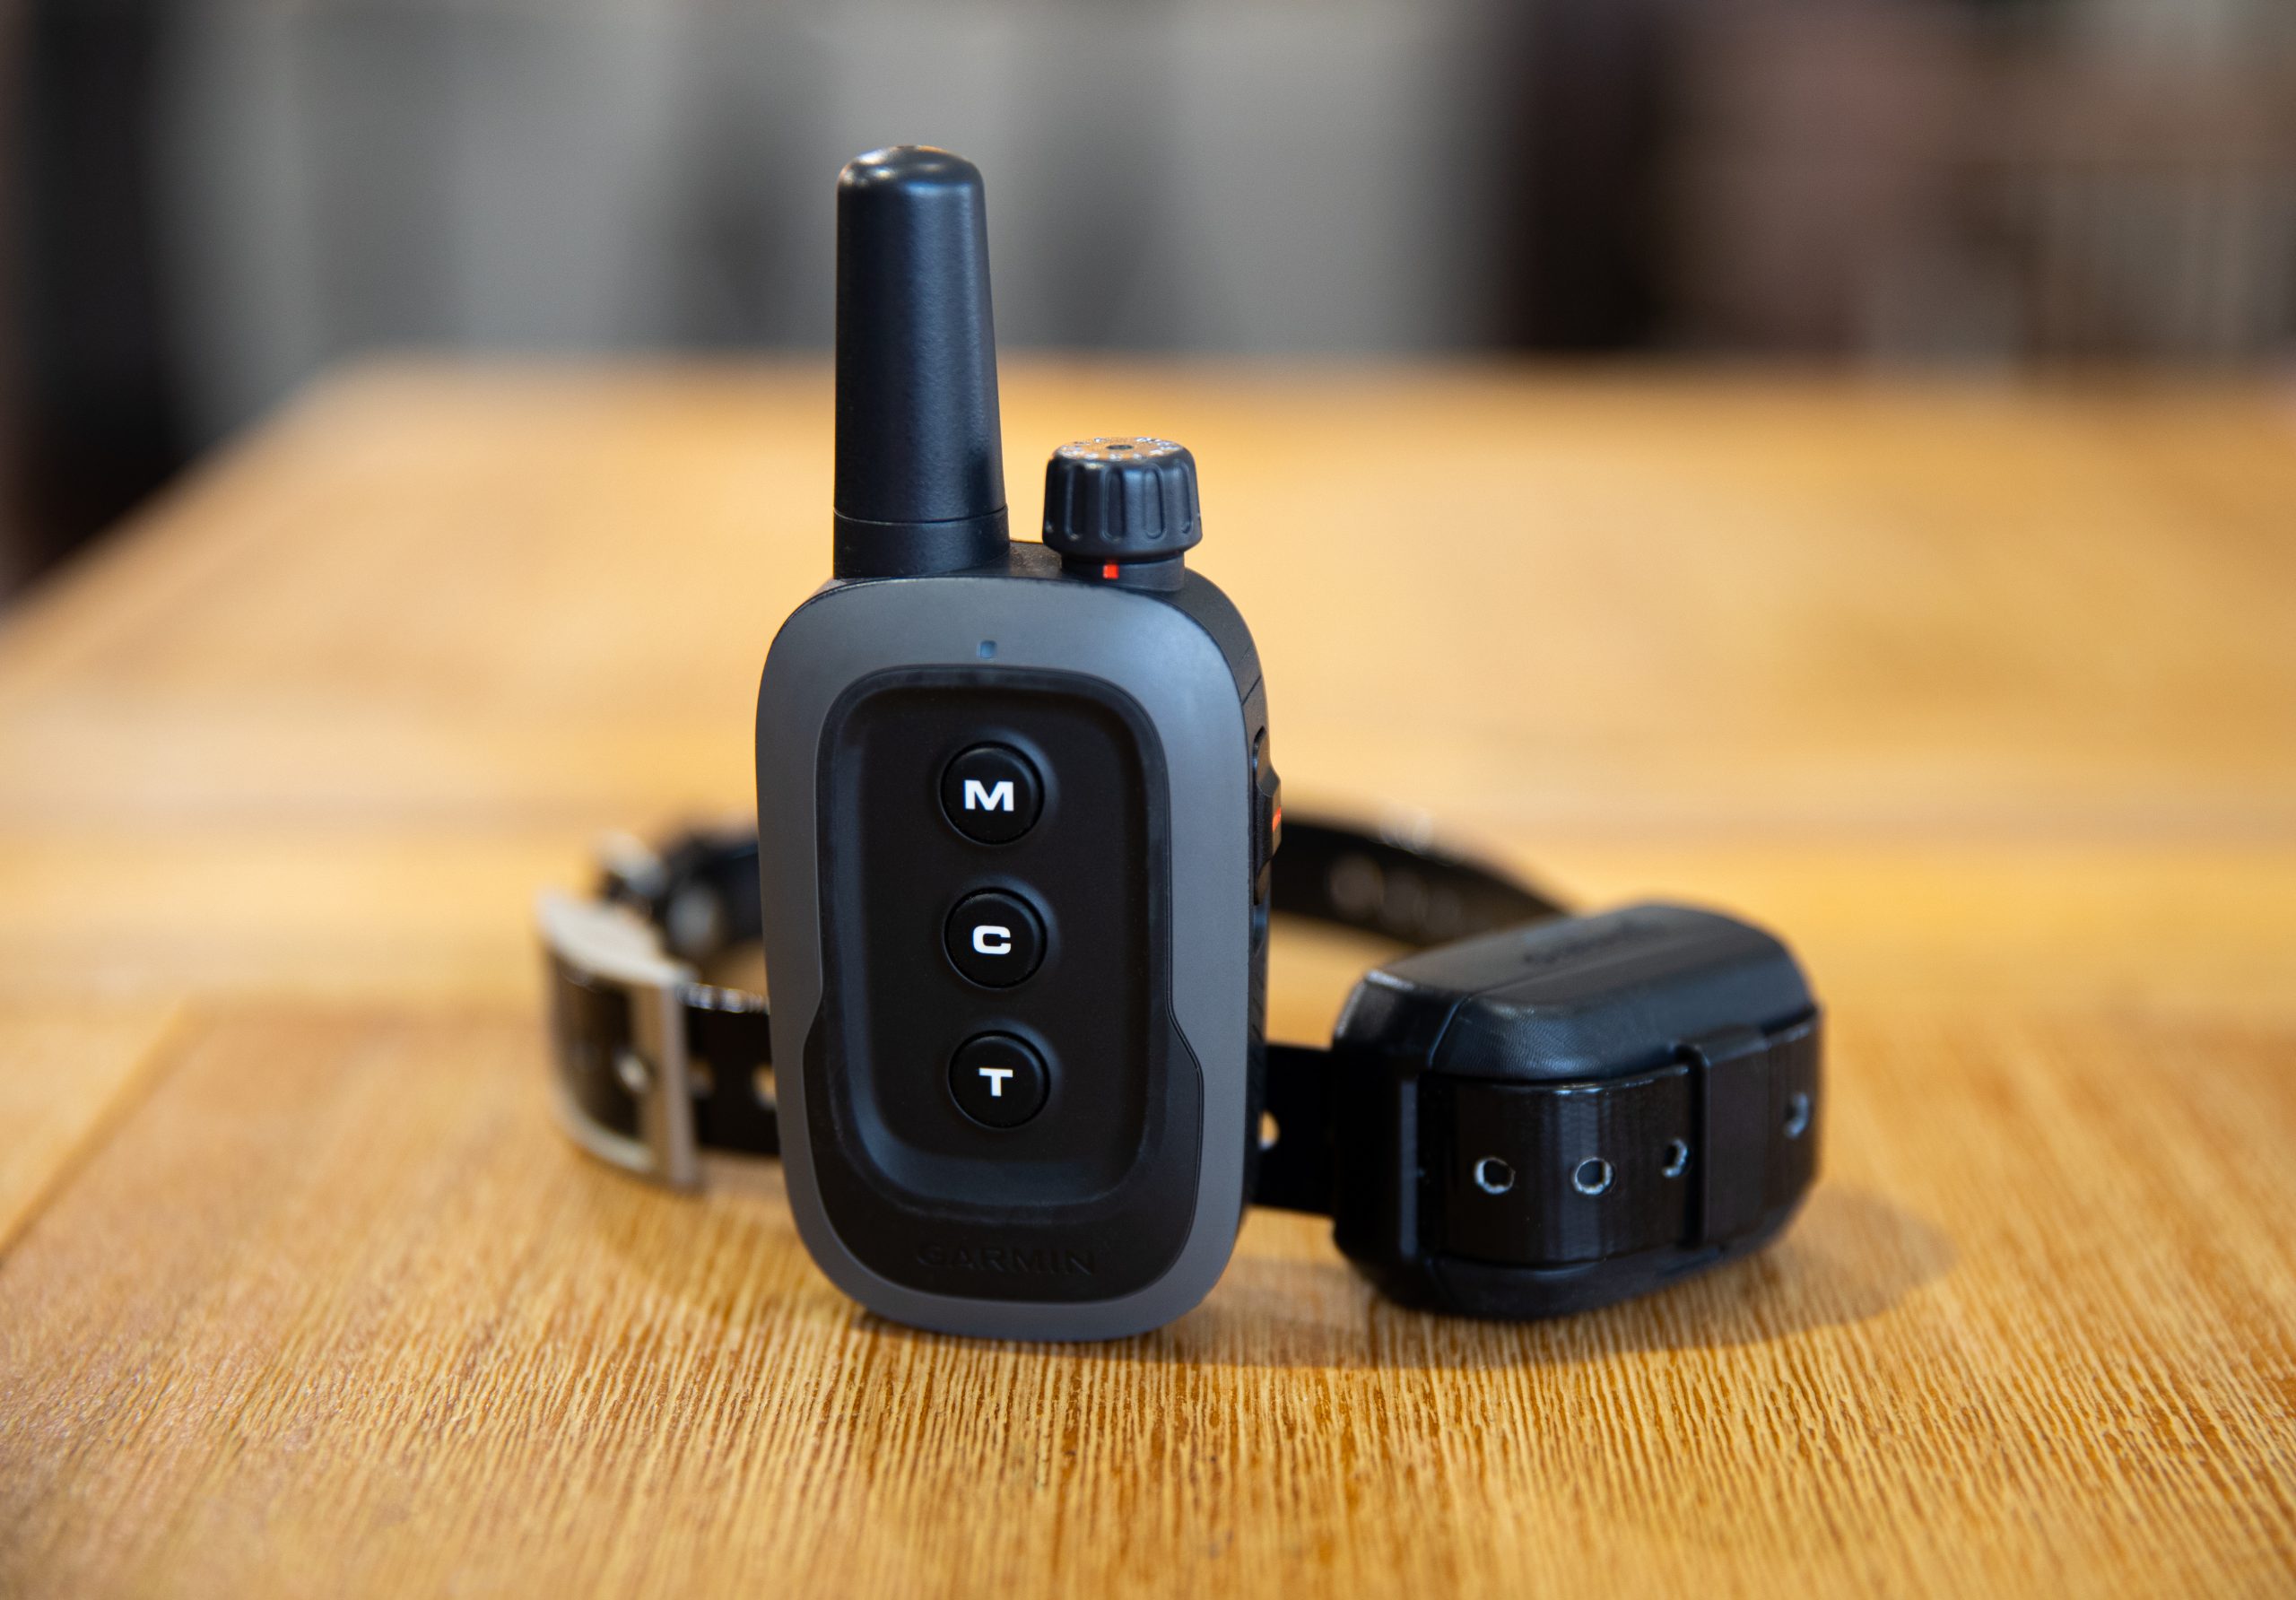 Optimize Your Dog Training with the NEW Garmin Delta SE 